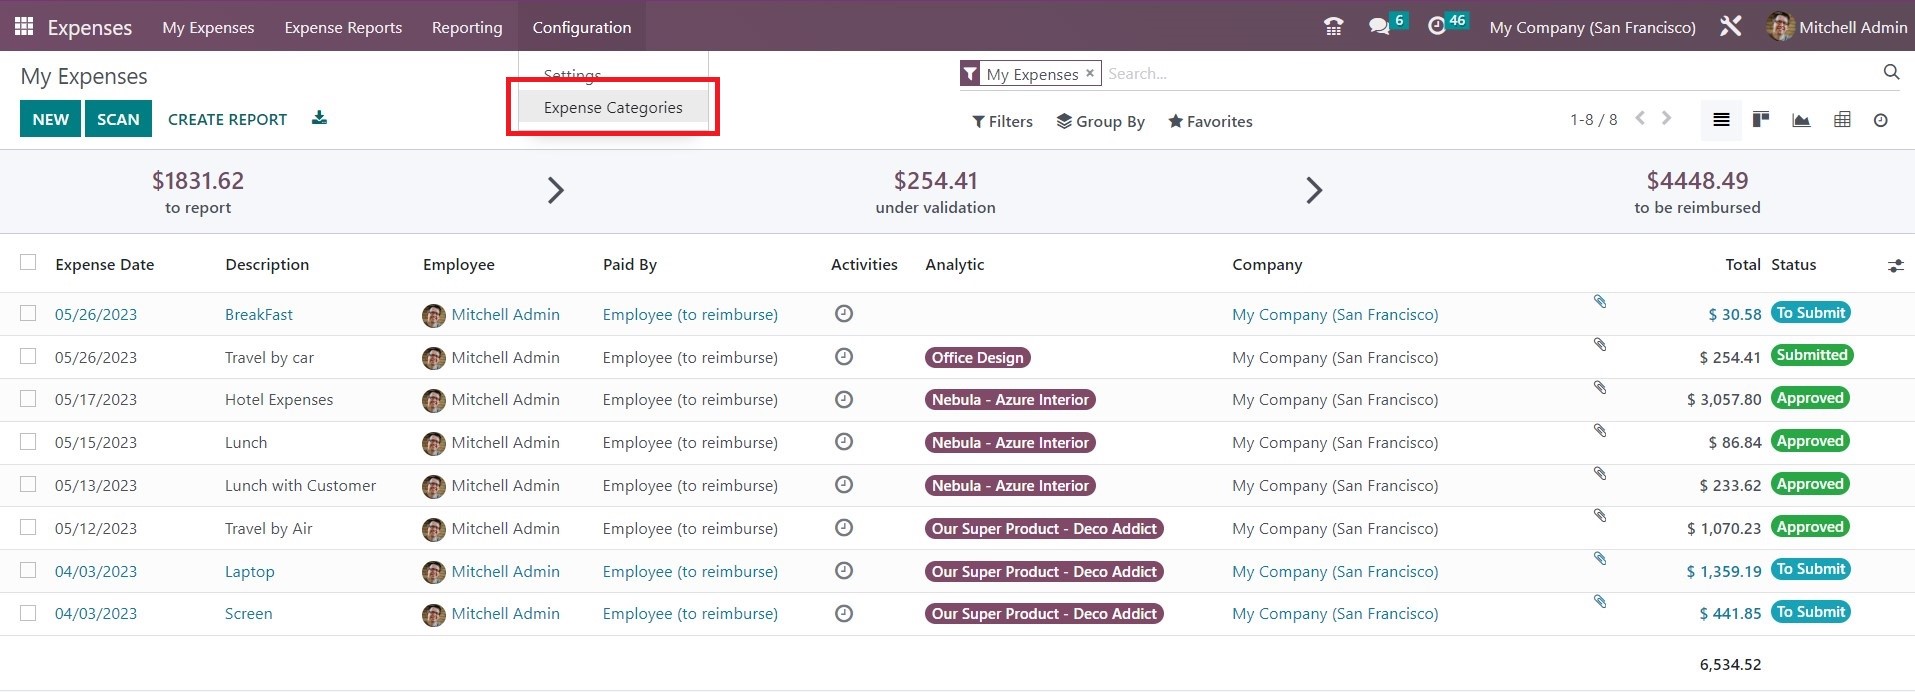 Reinvoicing Expenses To Customers in Odoo - 2 - Midis